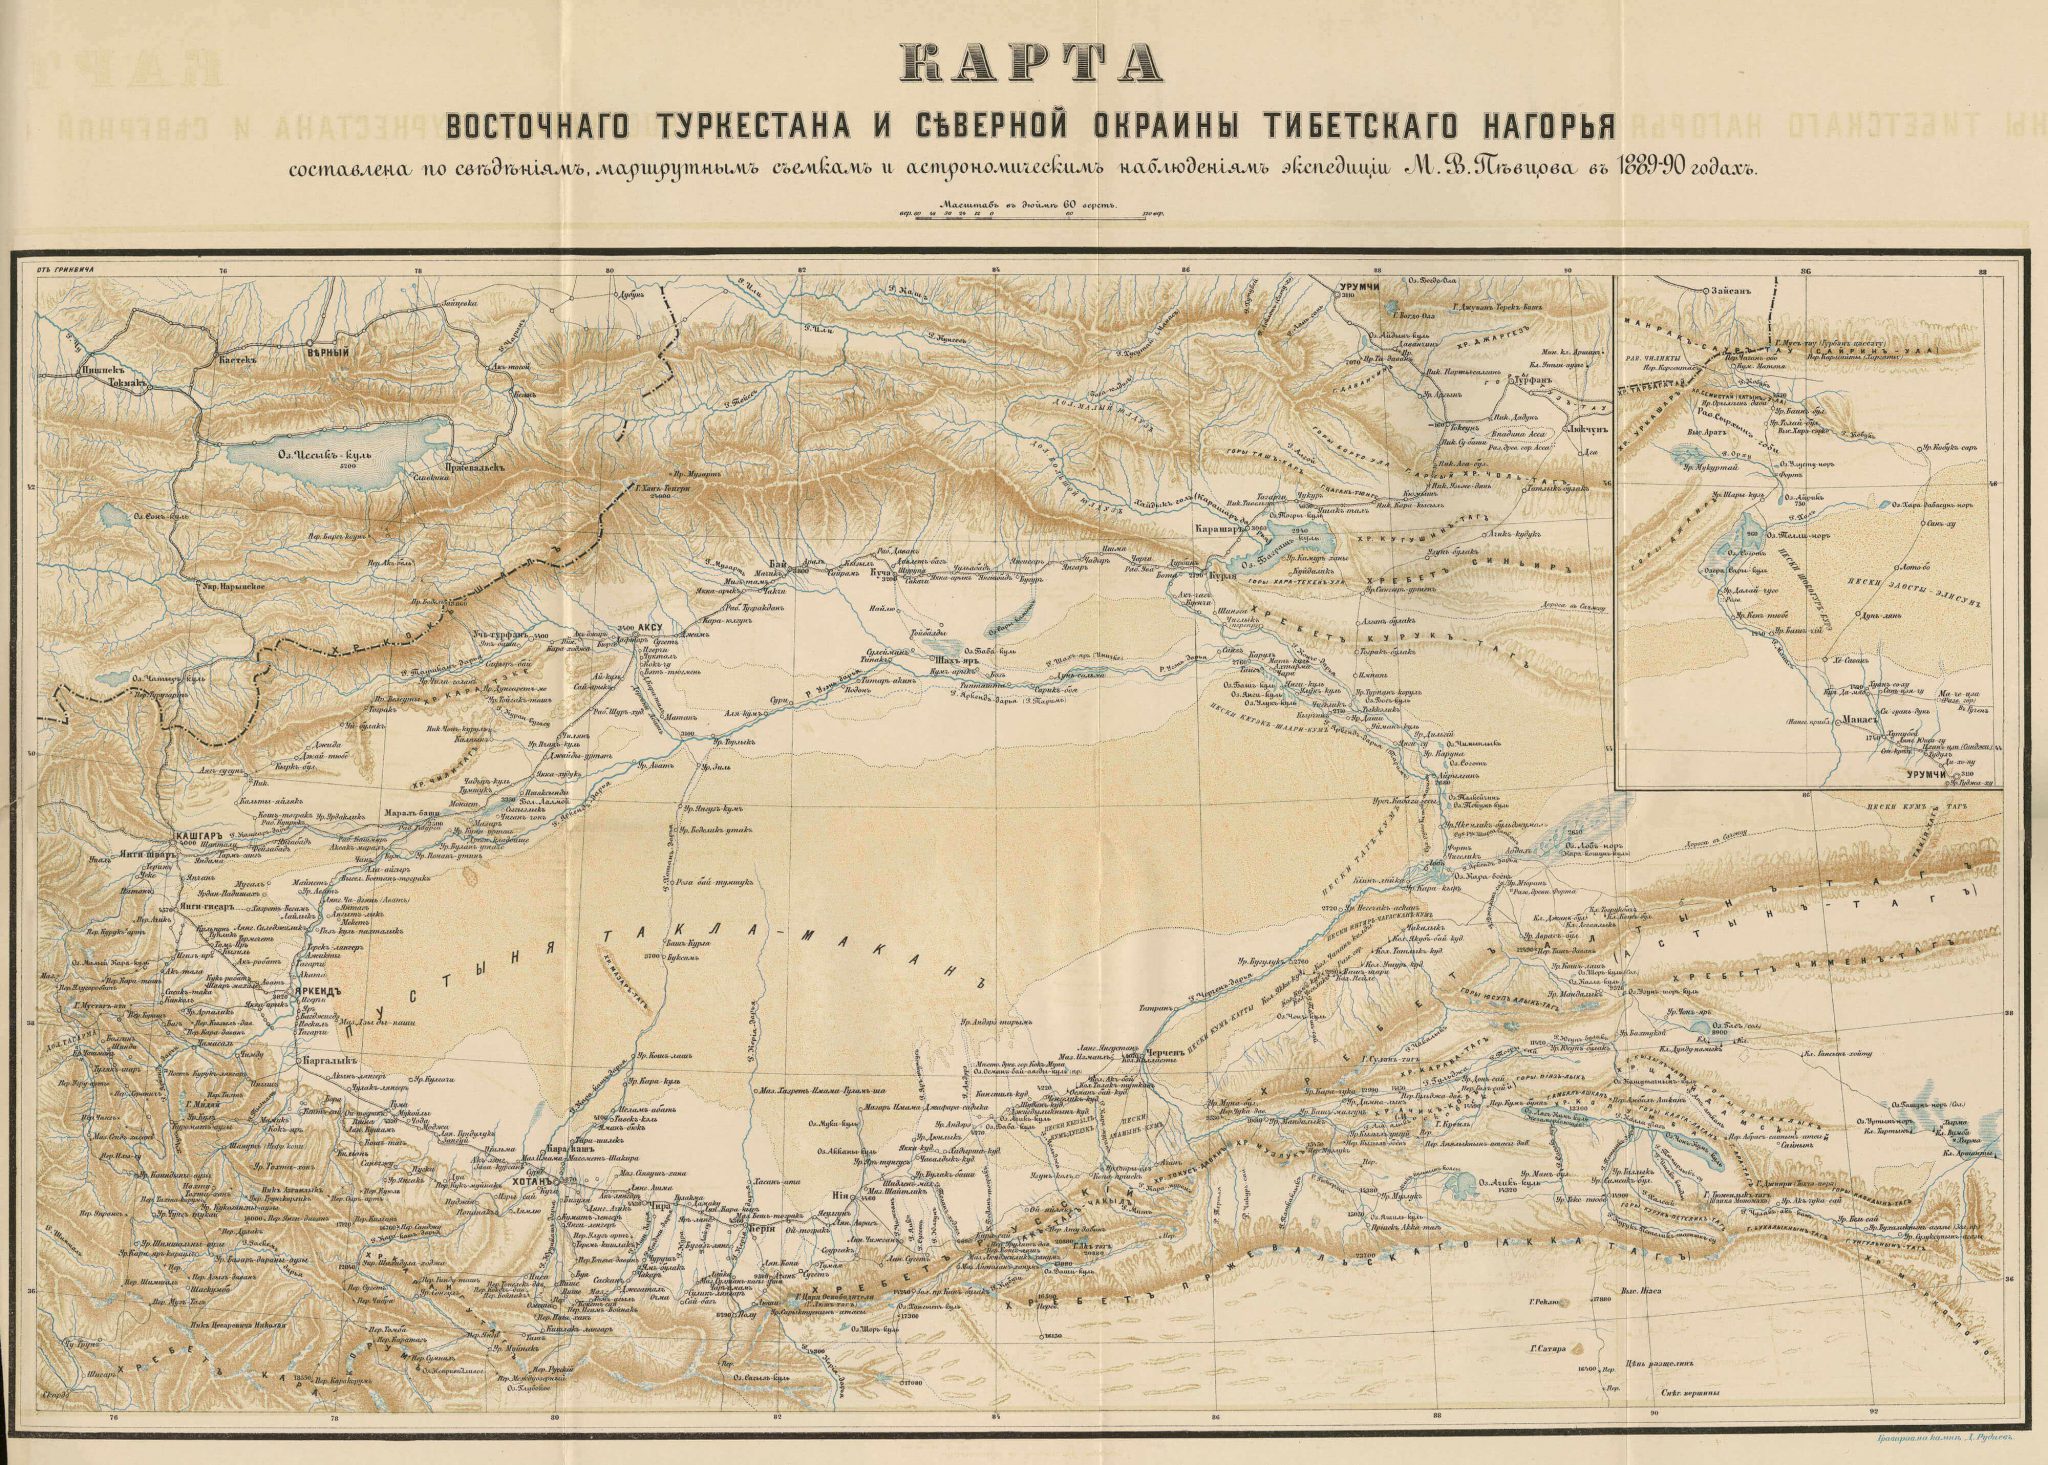 Map of Eastern Turkestan and the northern territory of the Tibetan Plateau 1895